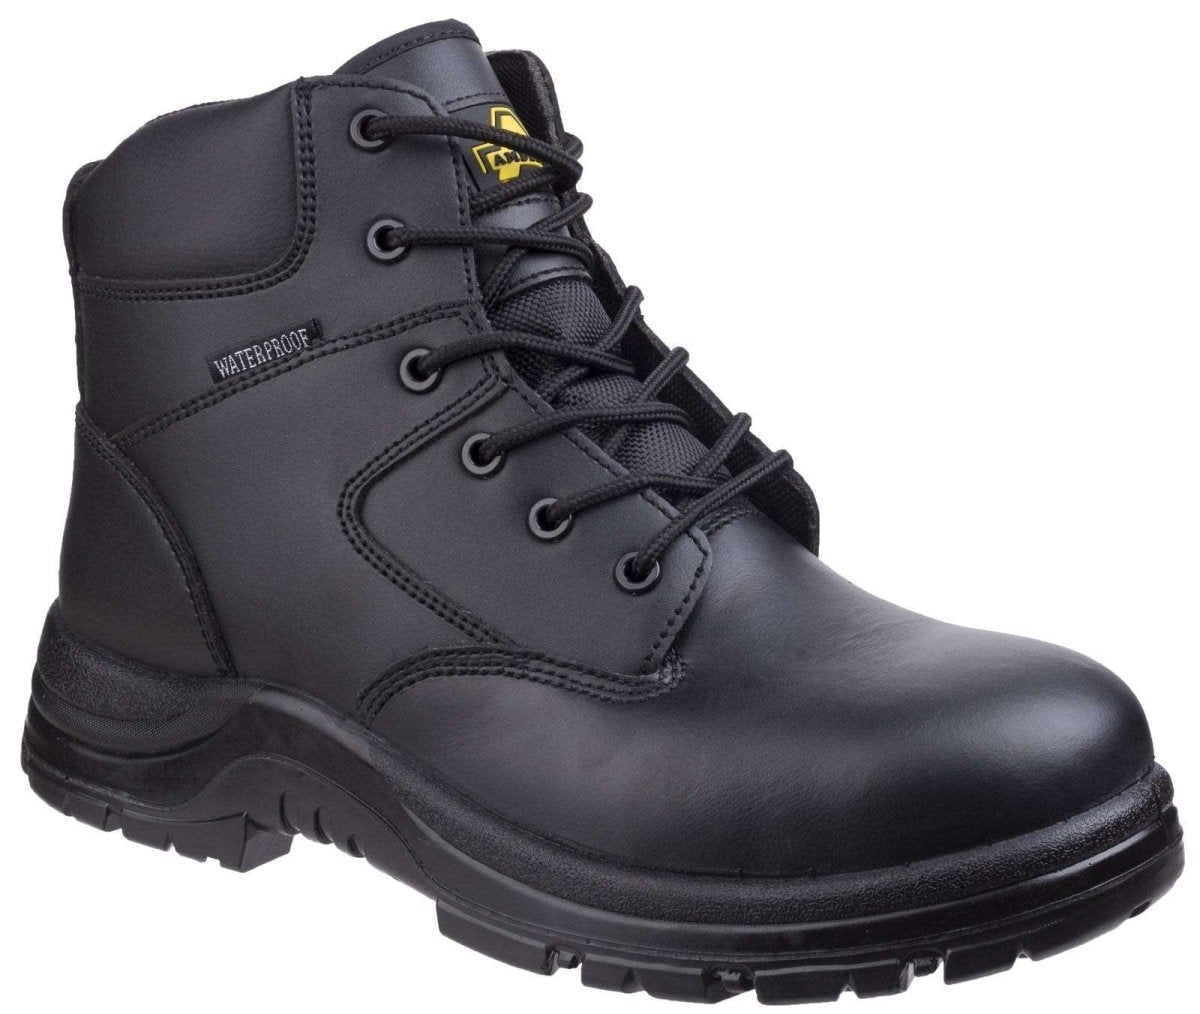 Amblers FS006C Waterproof Safety Boots - Shoe Store Direct